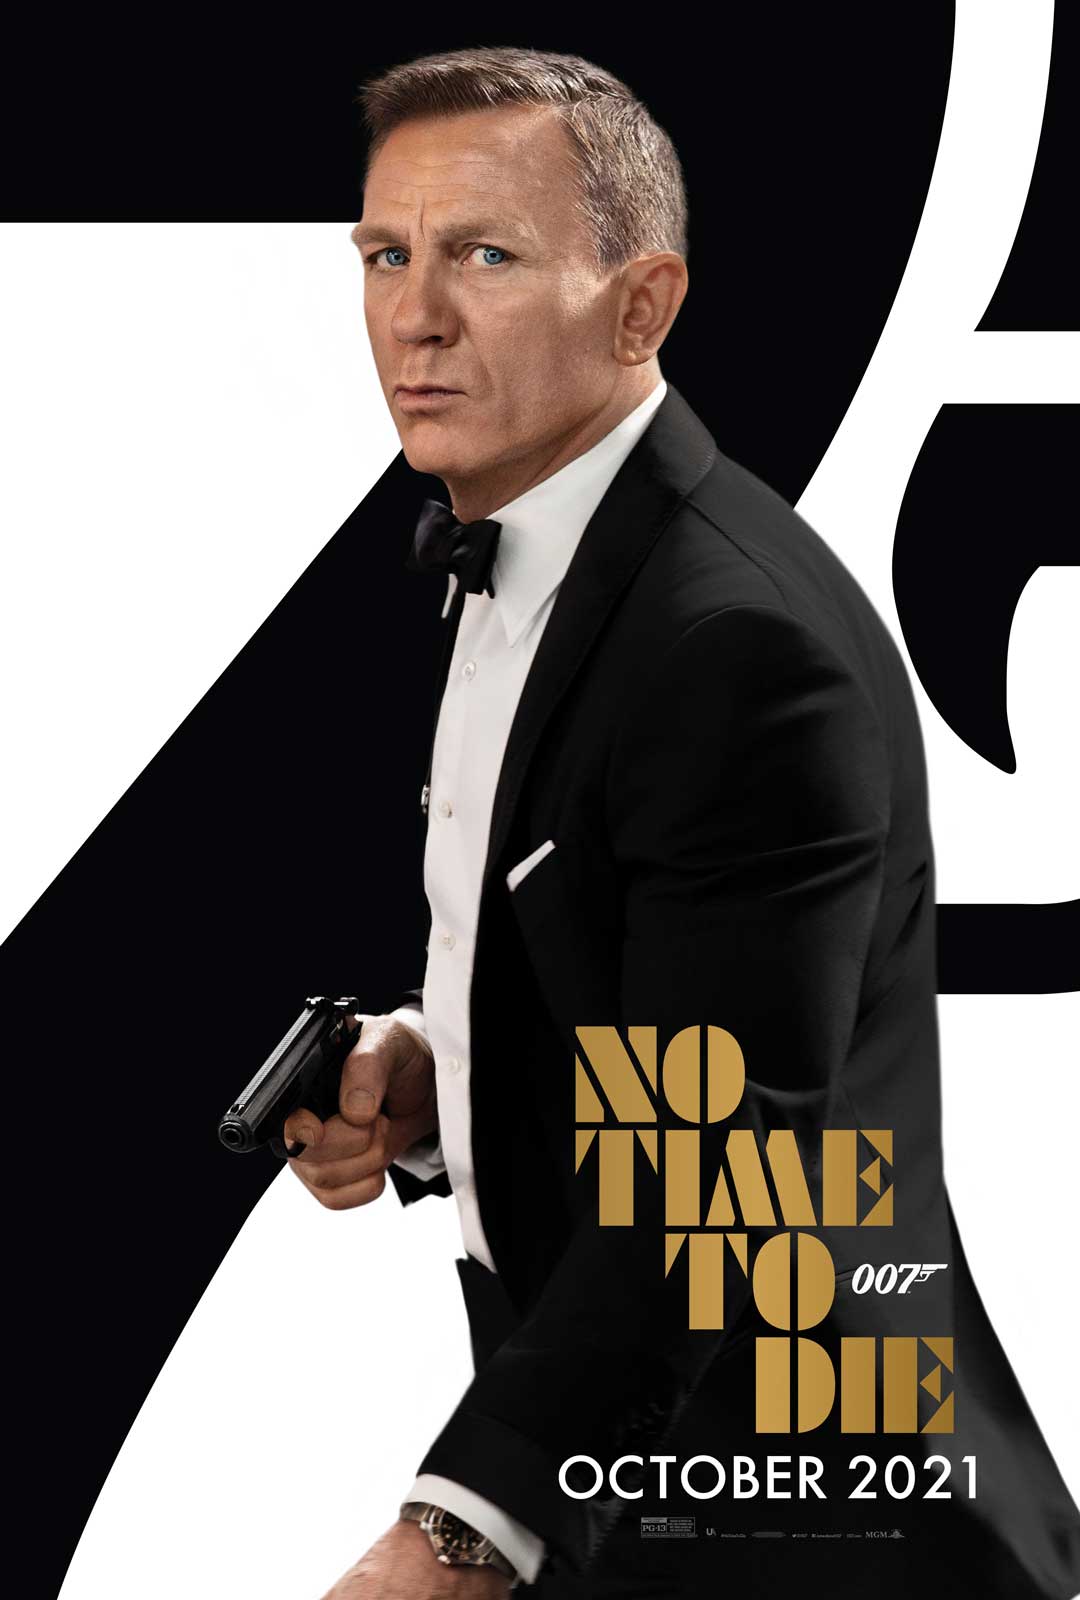 Poster for 'No Time to Die' (2021) releasing October 8. Dune will now premiere a full two weeks after the new Bond movie. 